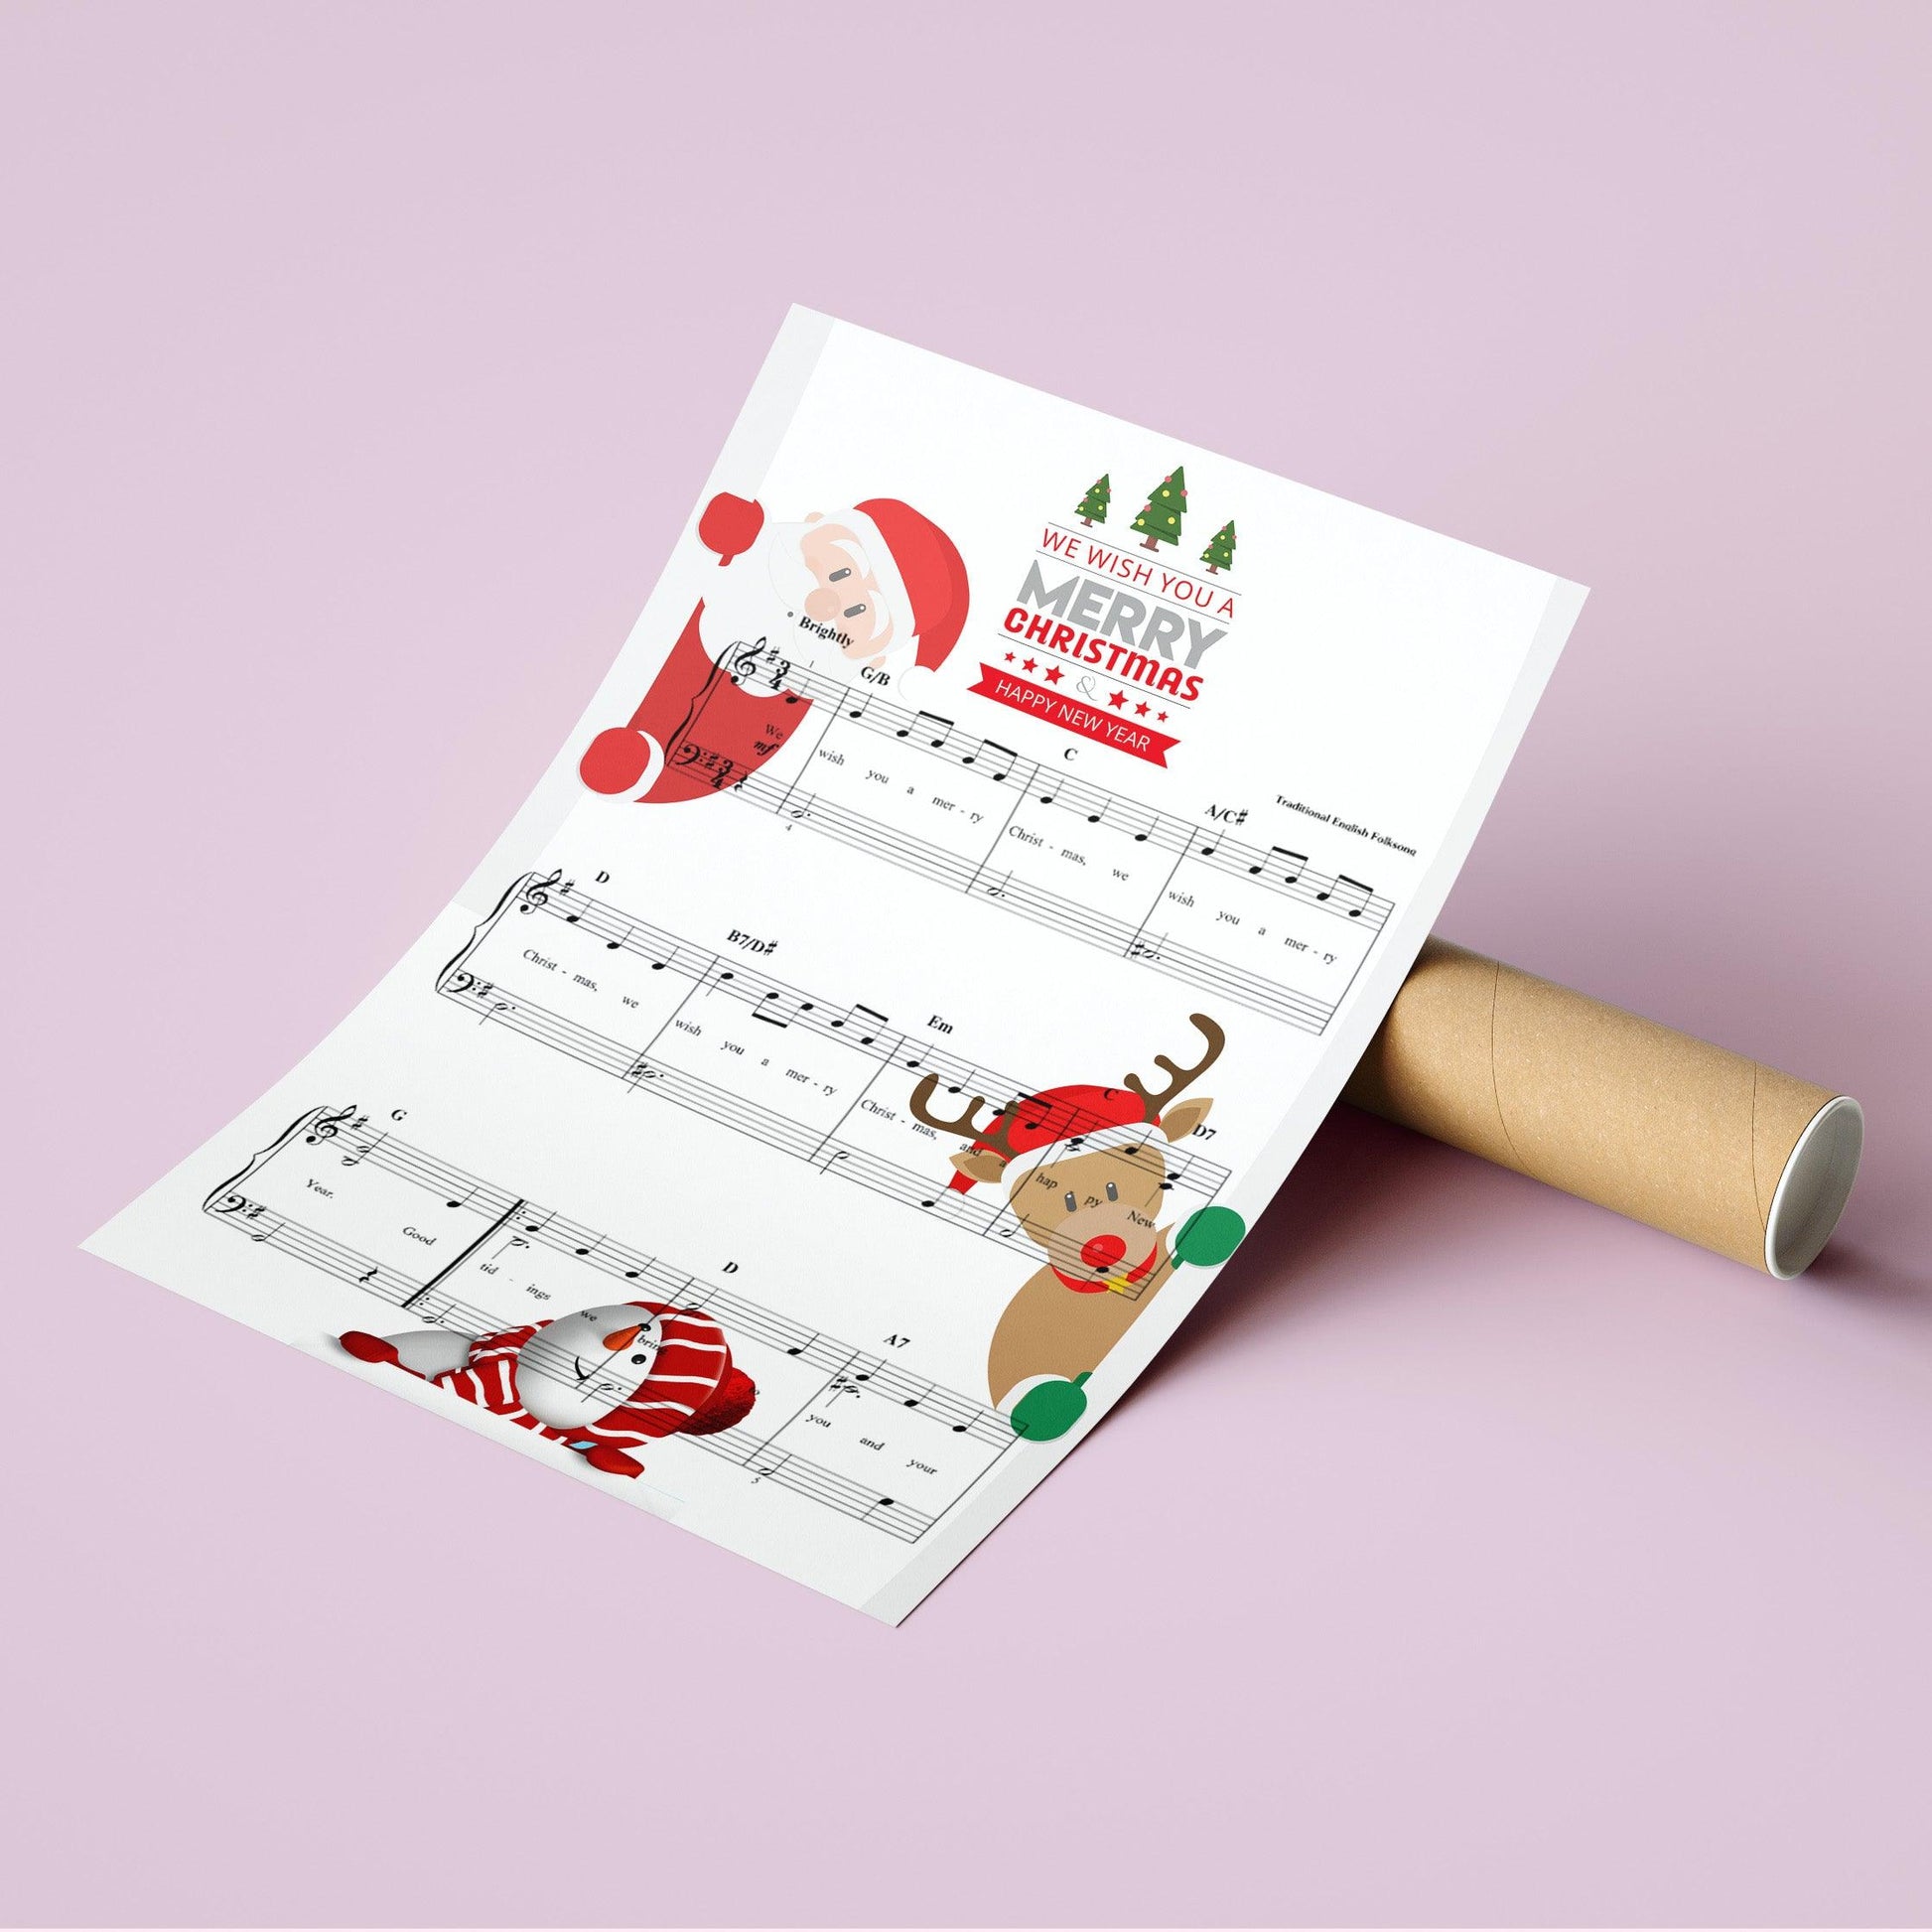 We wish you a merry Christmas Song Lyric Print | Song Music Sheet Notes Print  Everyone has a favorite song and now you can show the score as printed staff. The personal favorite song sheet print shows the song chosen as the score. 